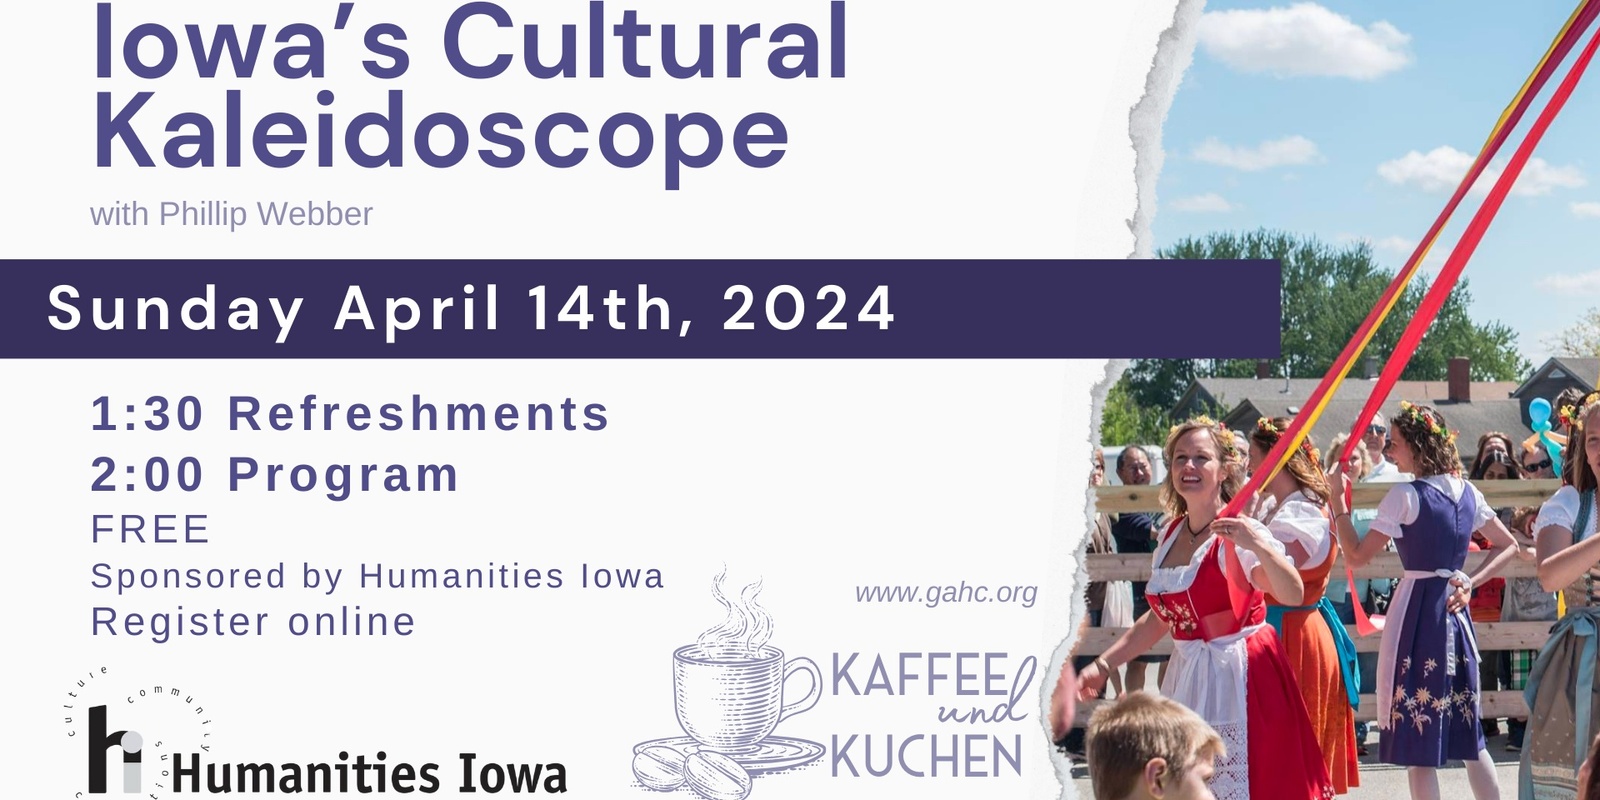 Banner image for Iowa's Cultural Kaleidoscope